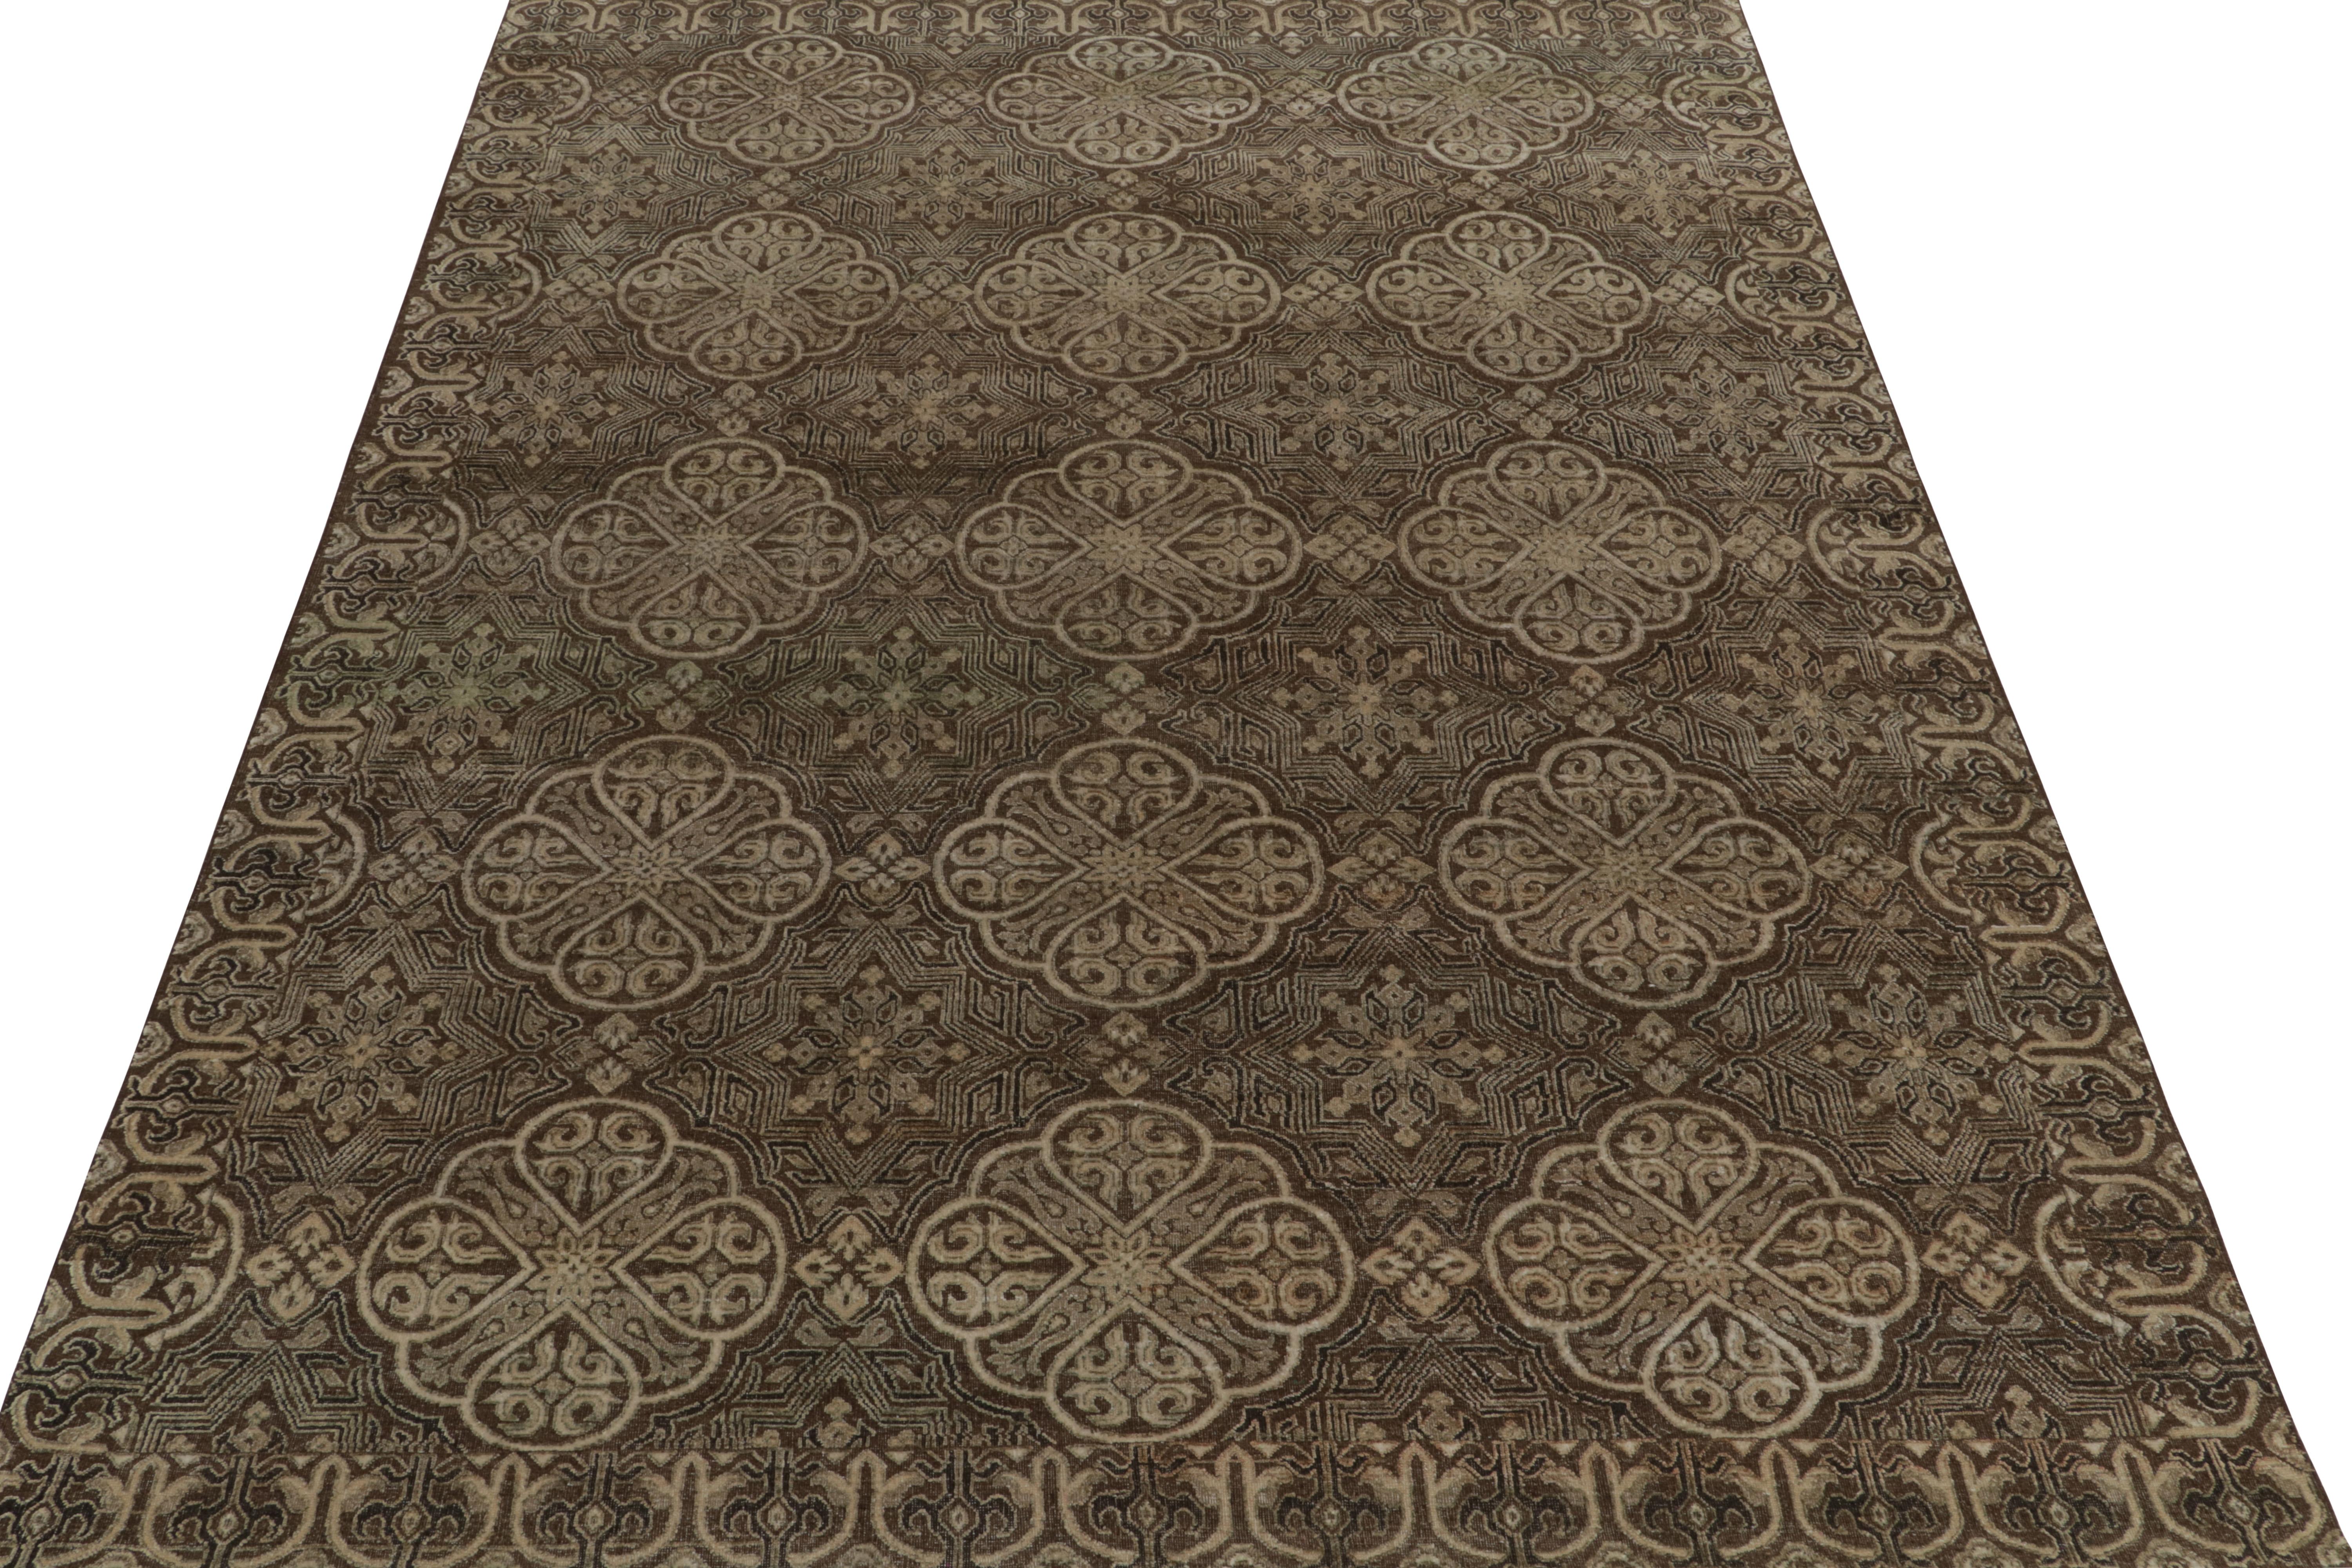 Indian Rug & Kilim’s Spanish Classic style rug in Beige-Brown, Black Geometric Patterns For Sale